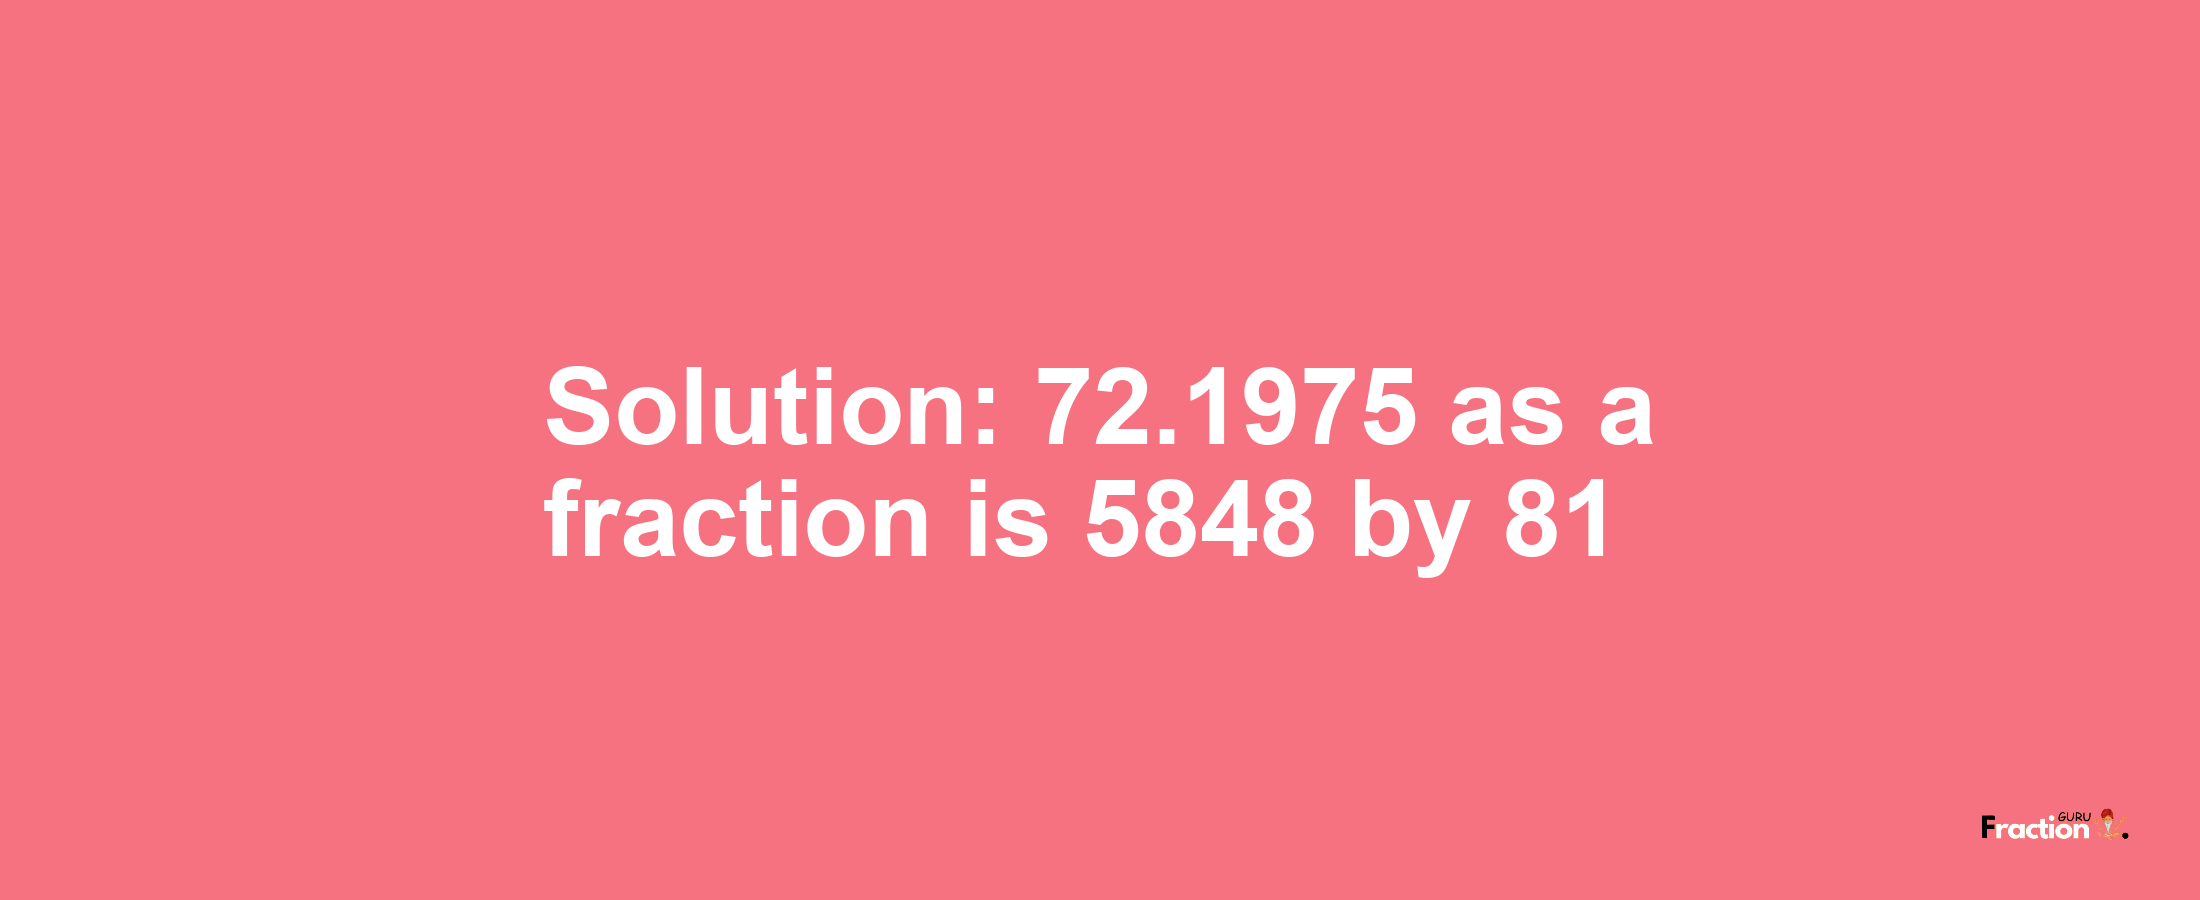 Solution:72.1975 as a fraction is 5848/81